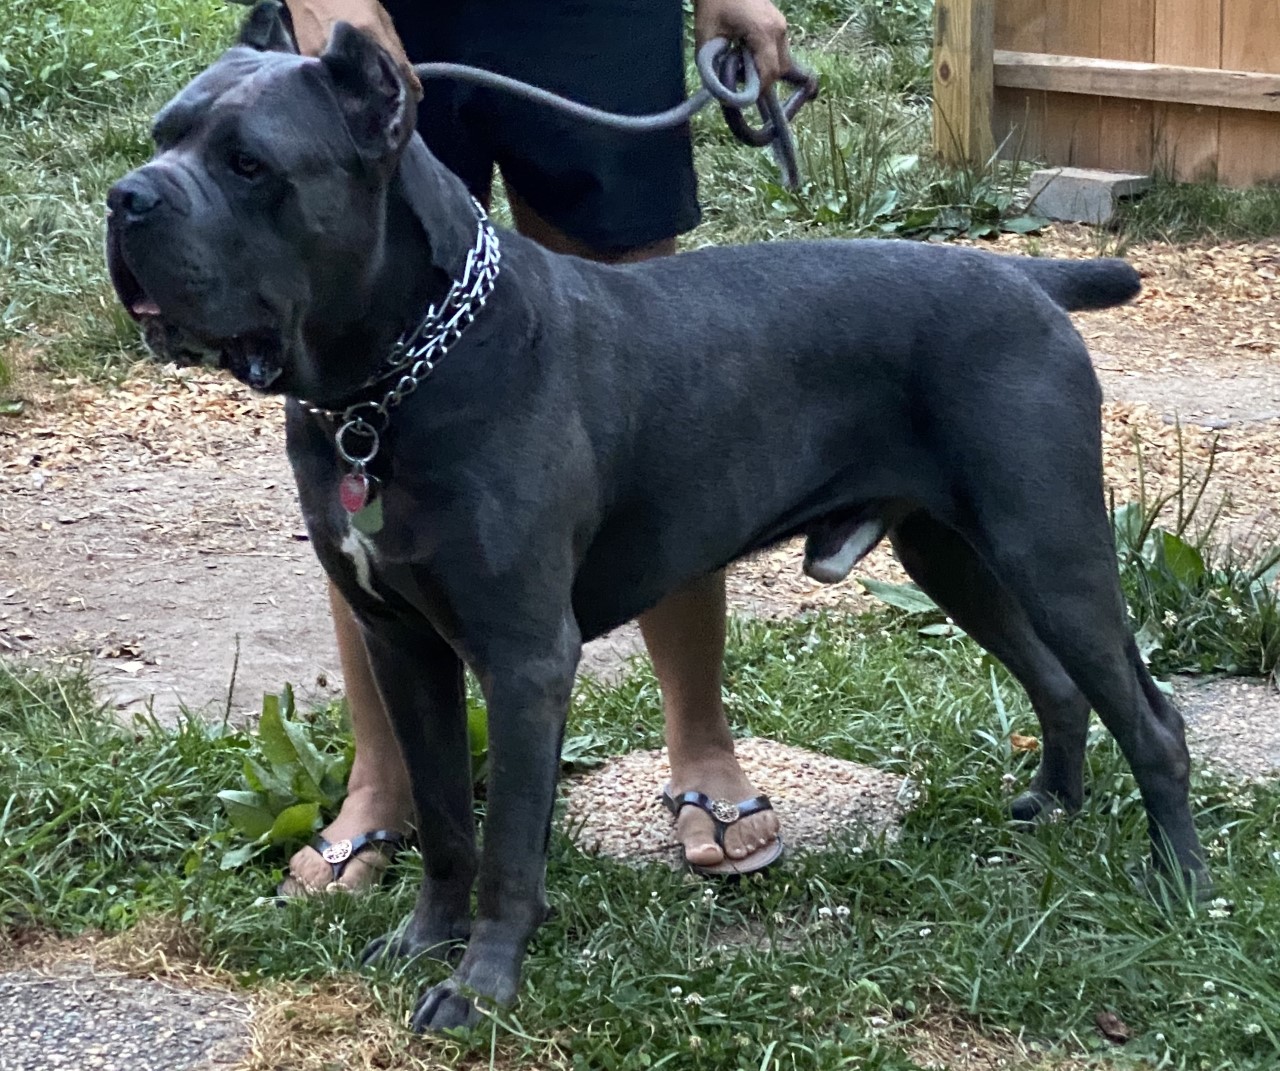 How to Train Cane Corso Complete Guide: 6 Training Techniques for a Happy and Obedient Dog